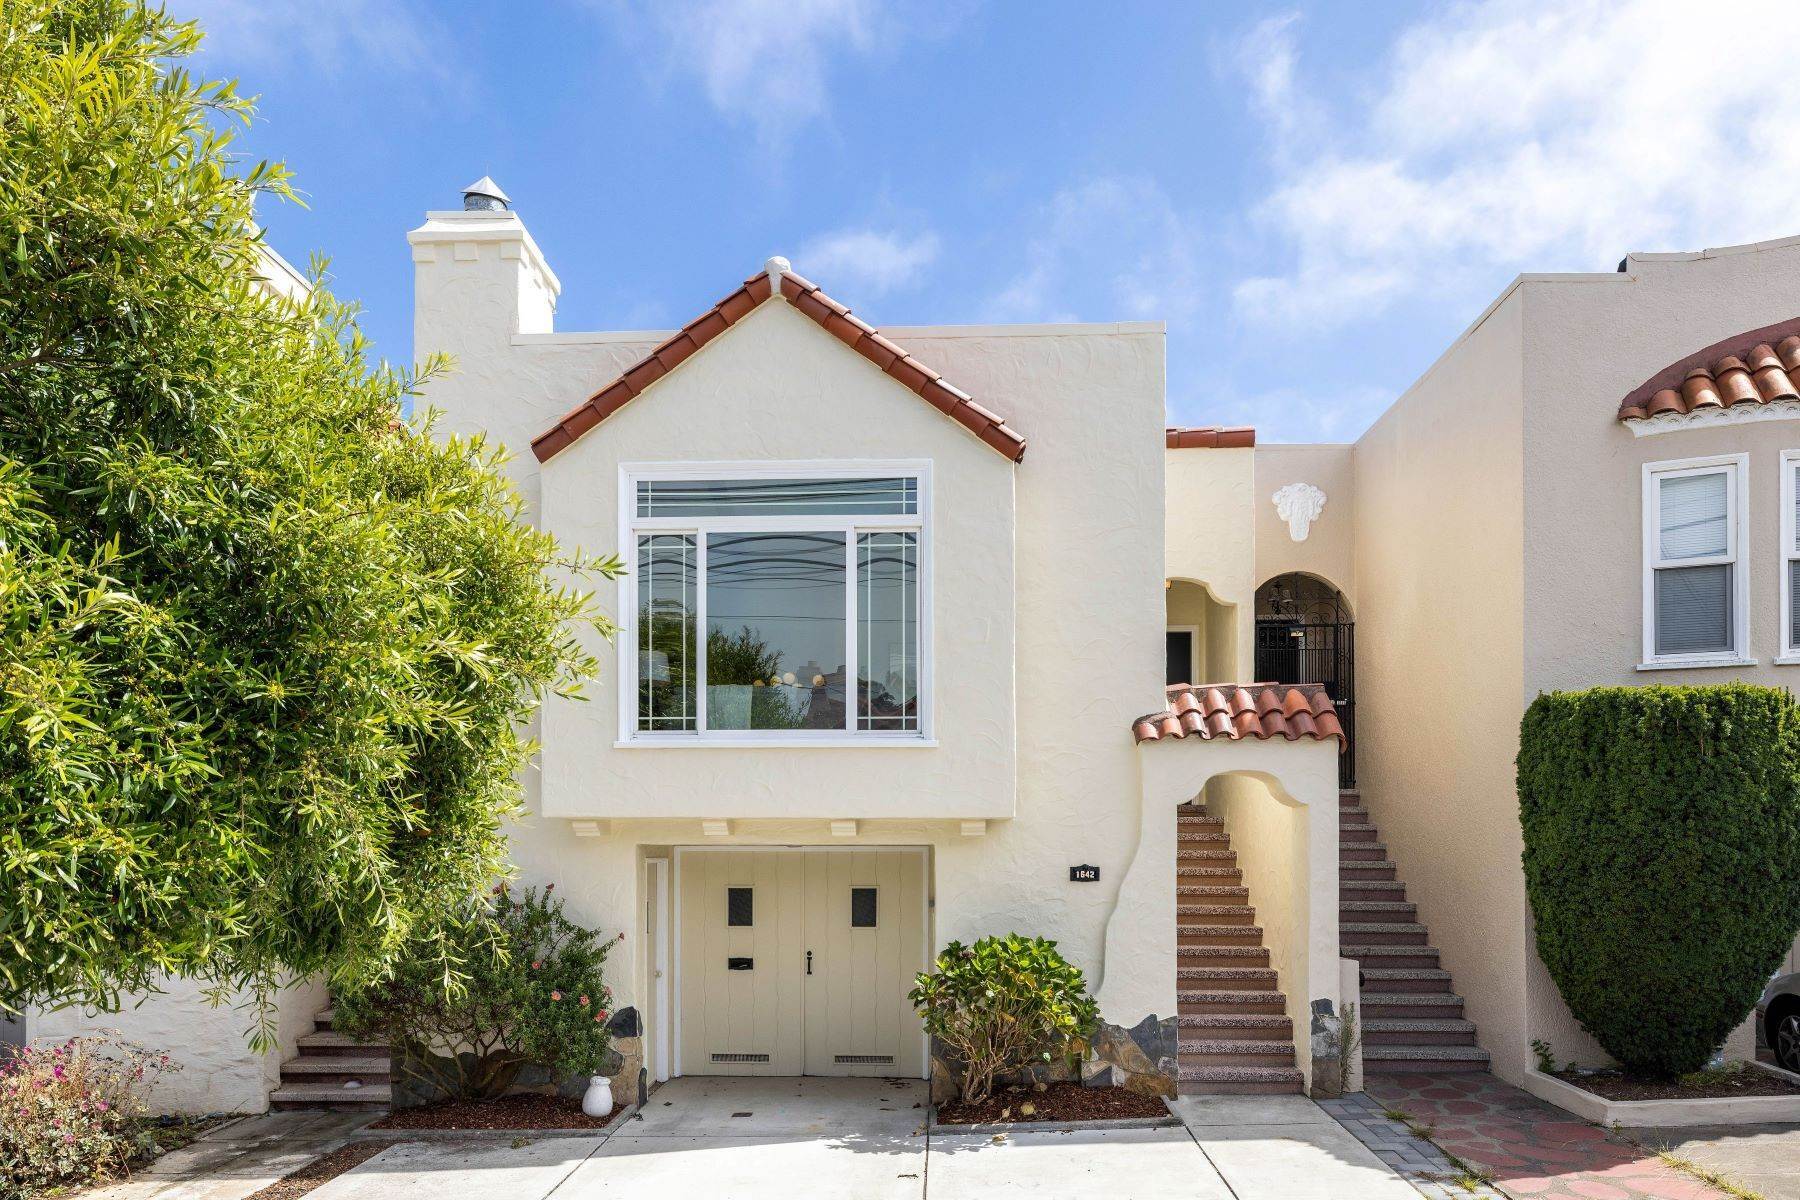 Single Family Homes for Sale at Stunning Mediterranean Revival Home in the Sunset 1642 27th Avenue San Francisco, California 94122 United States